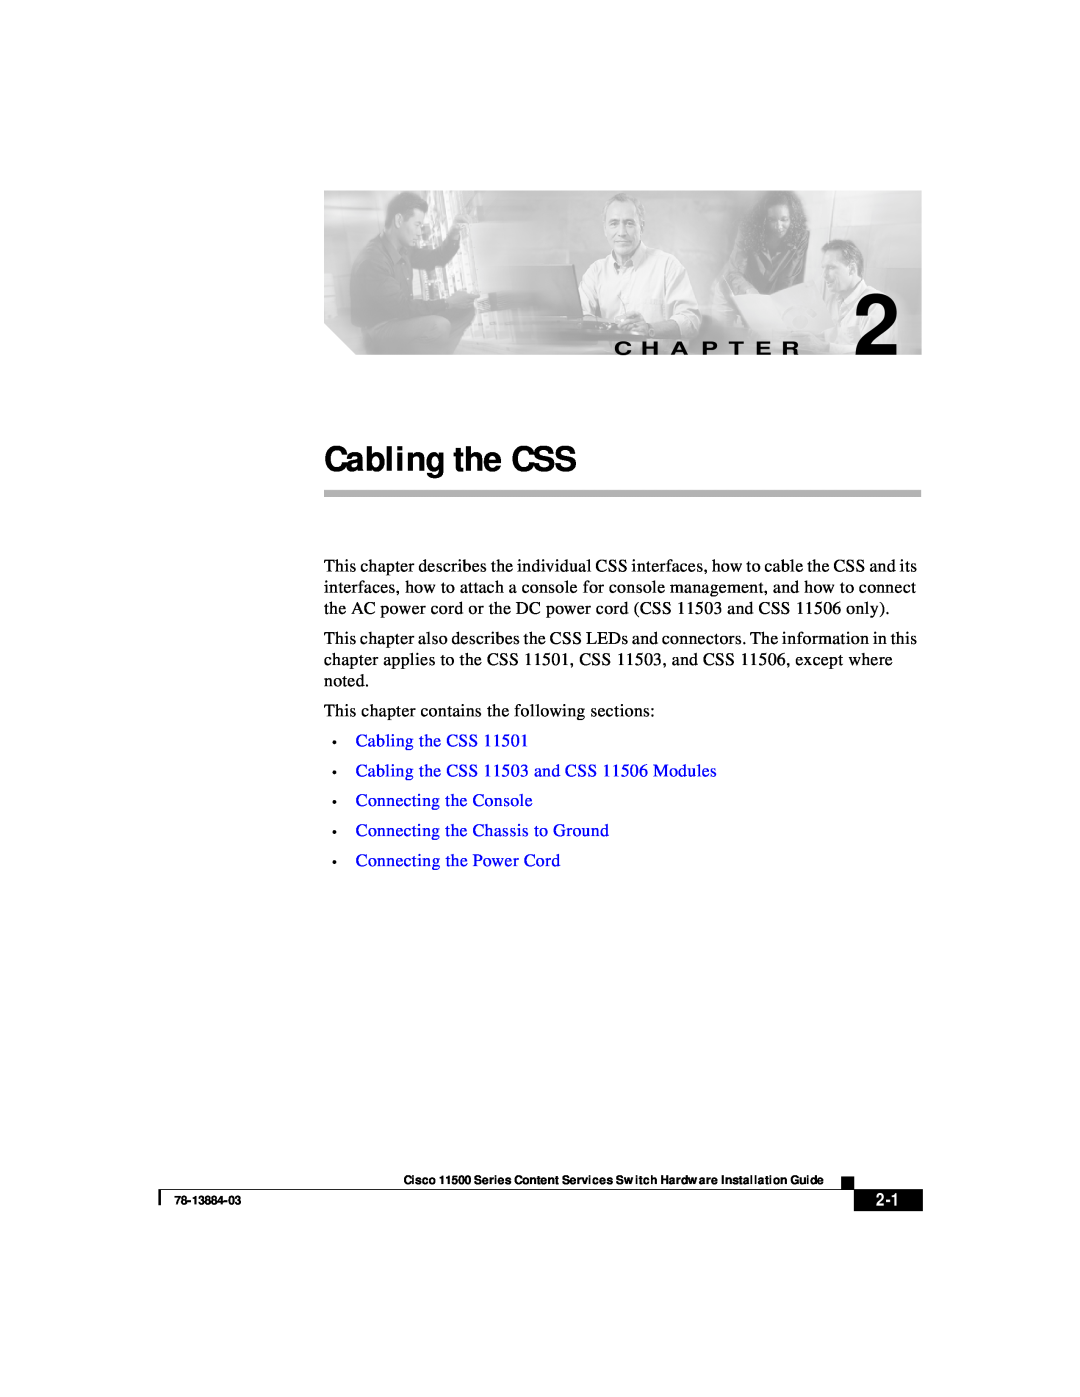 Cisco Systems 11500 Series manual C H A P T E R, Cabling the CSS Cabling the CSS 11503 and CSS 11506 Modules 